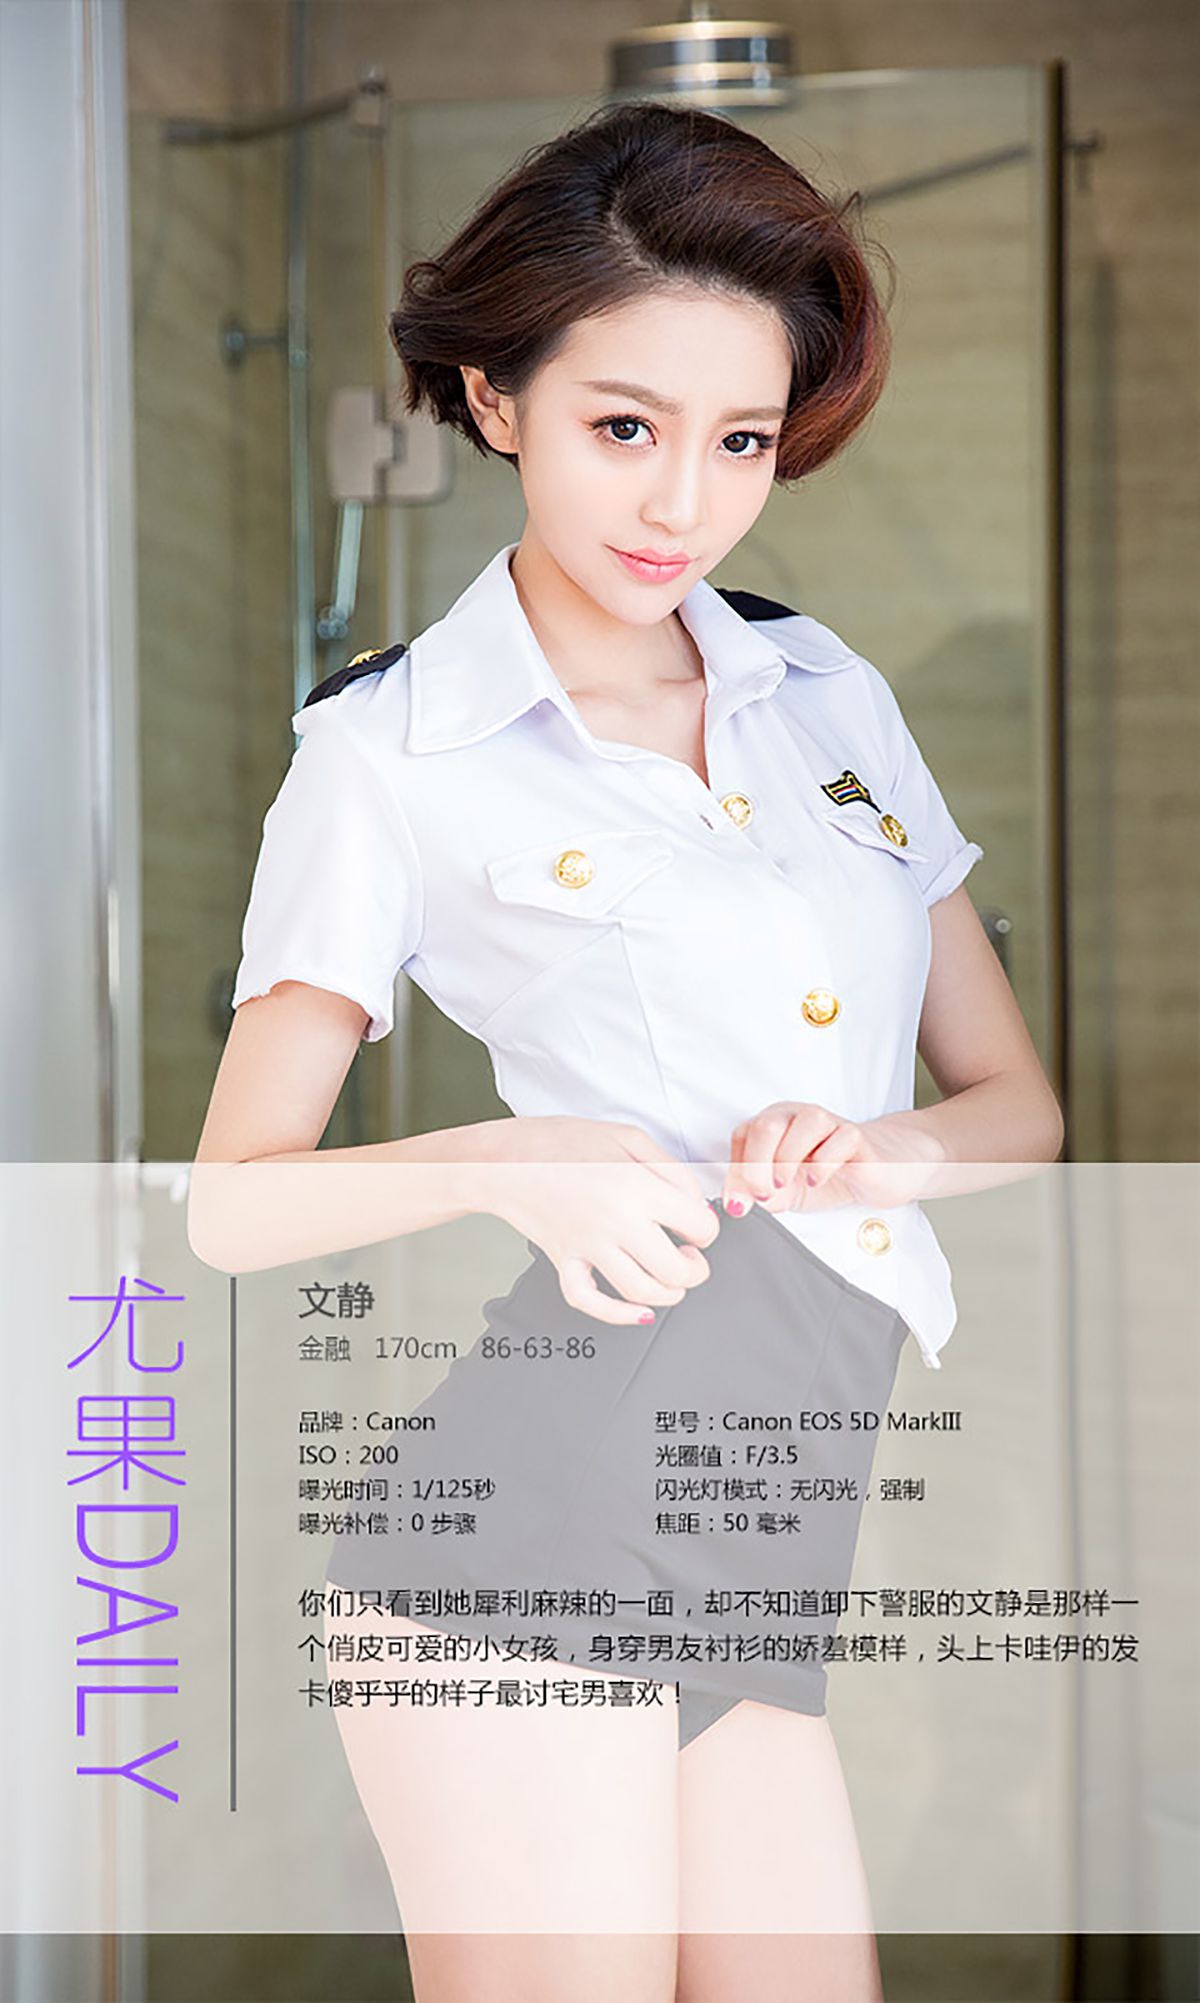 Wen Jing Fall in Love with Police Flowers 爱 Ugirls No.327